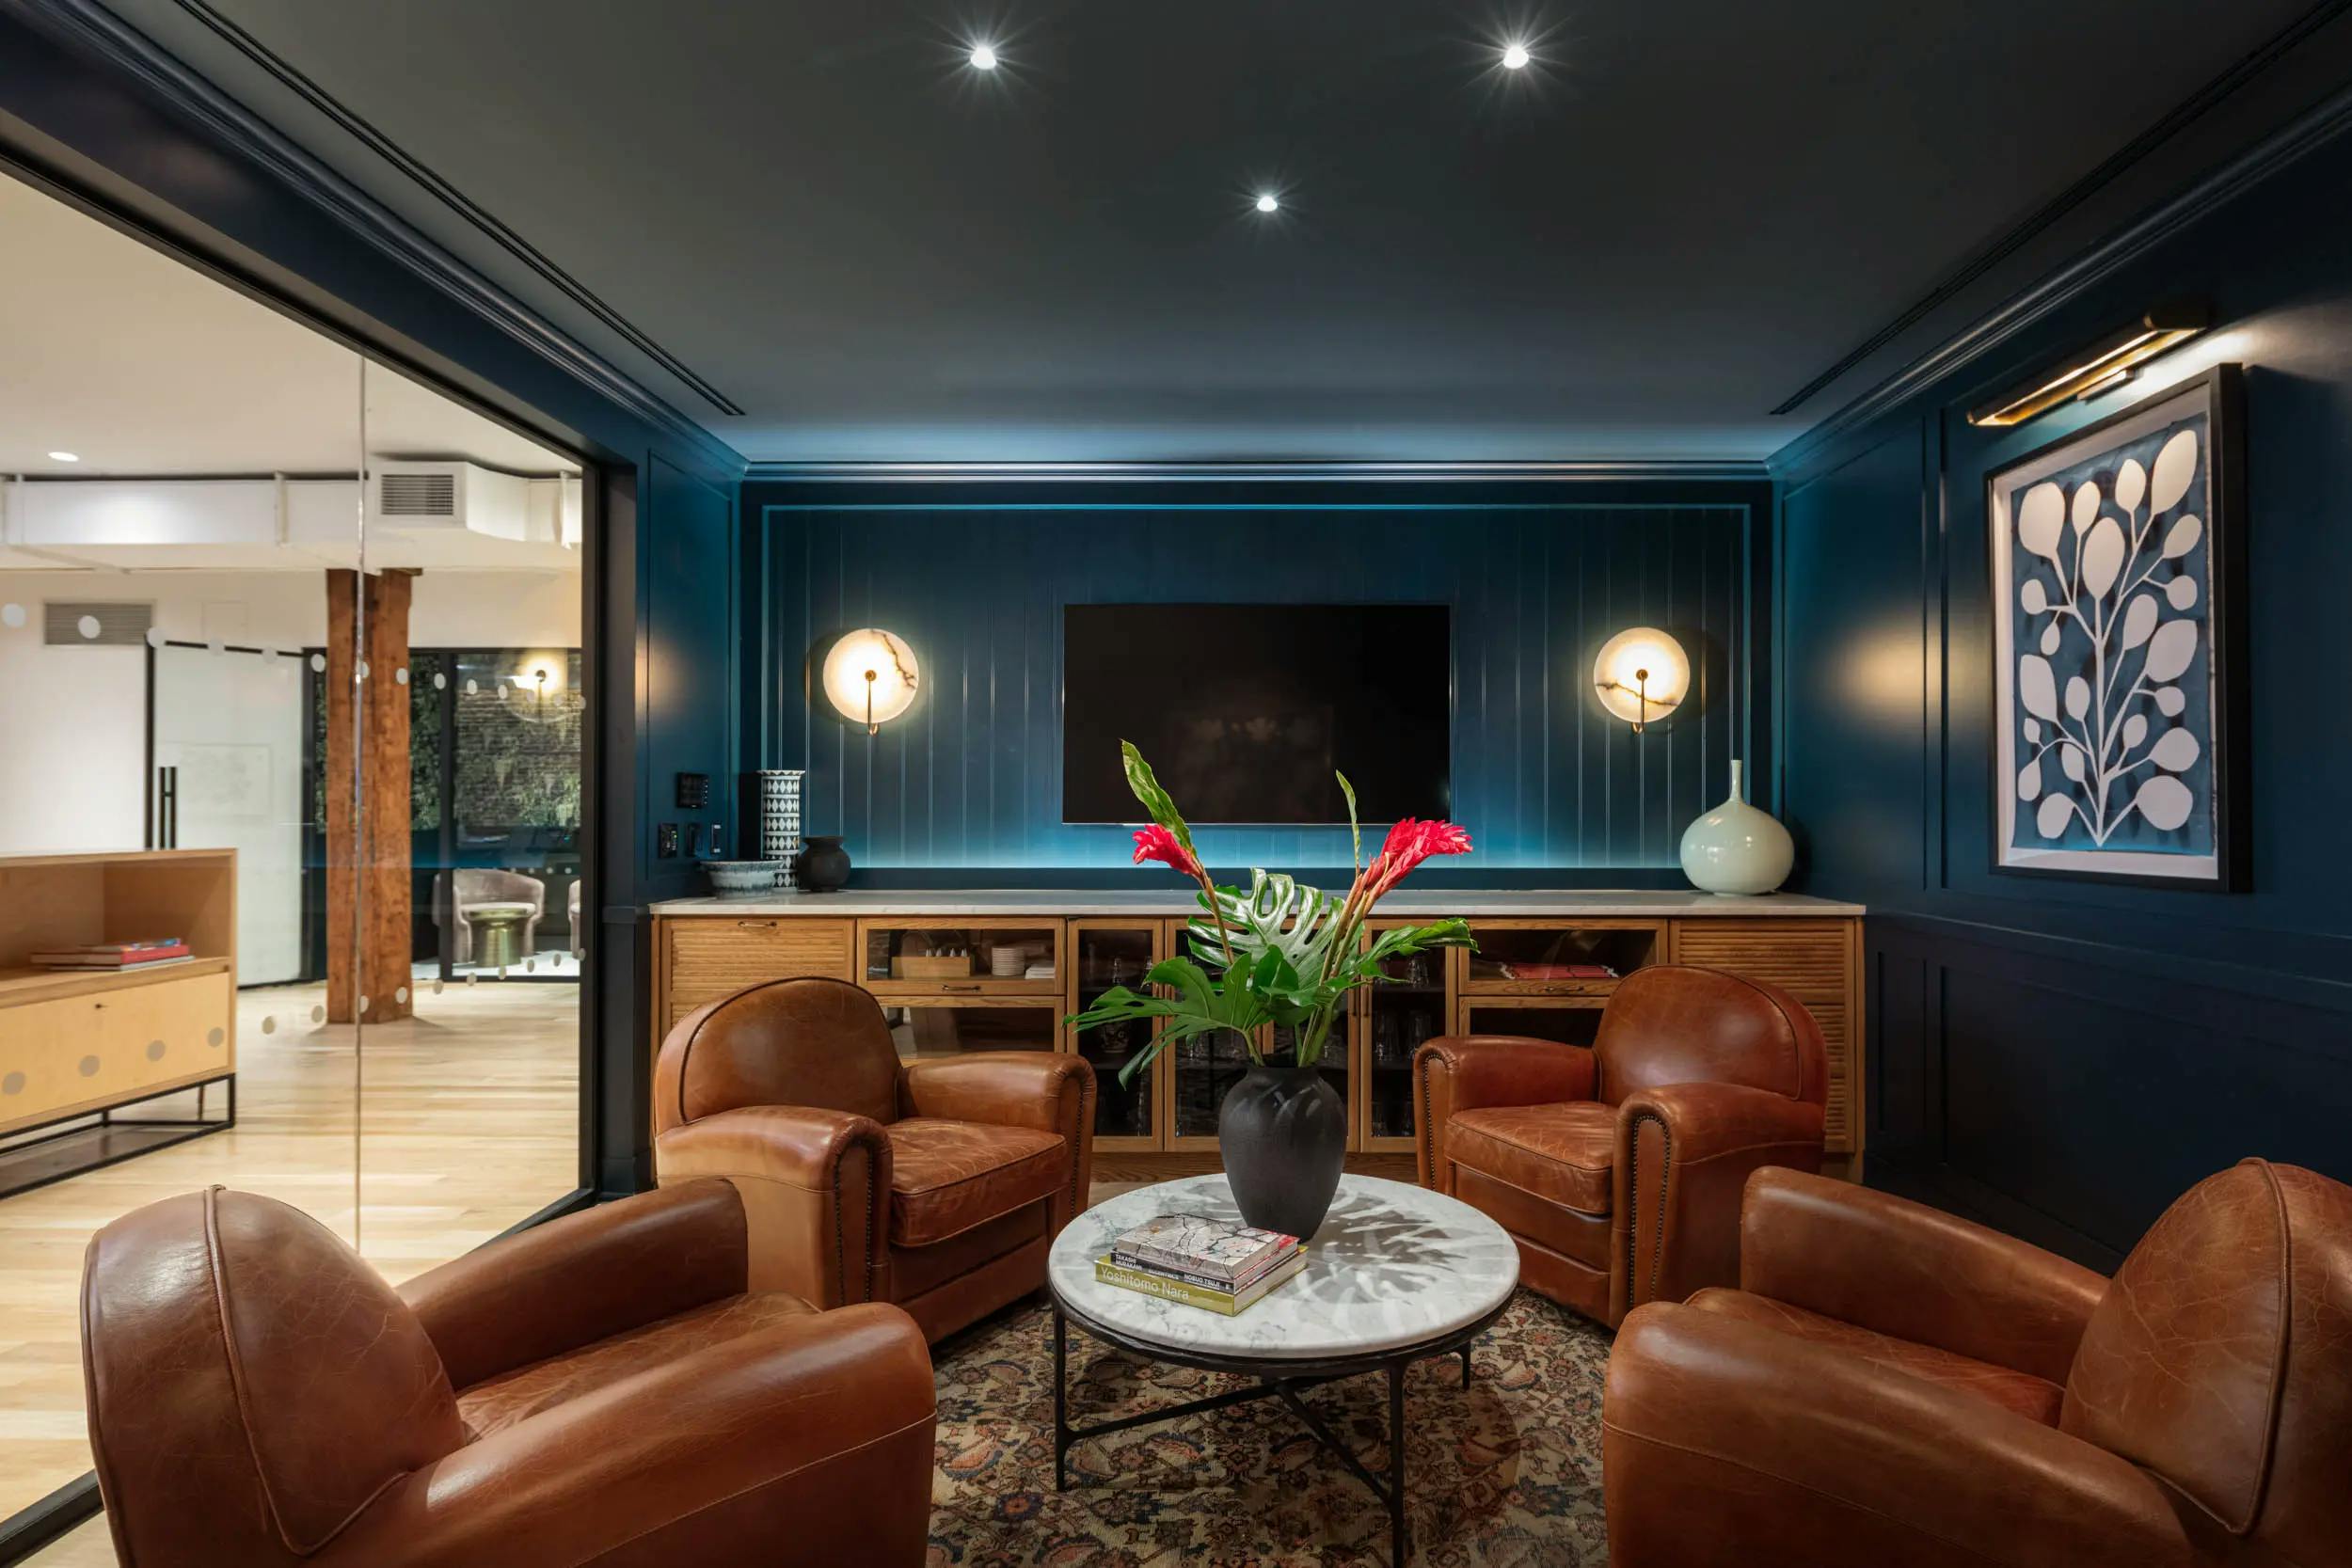 A blue conference room at FIG with four leather chairs and a blue botanical painting by Kate Roebuck installed on the right side of the room.